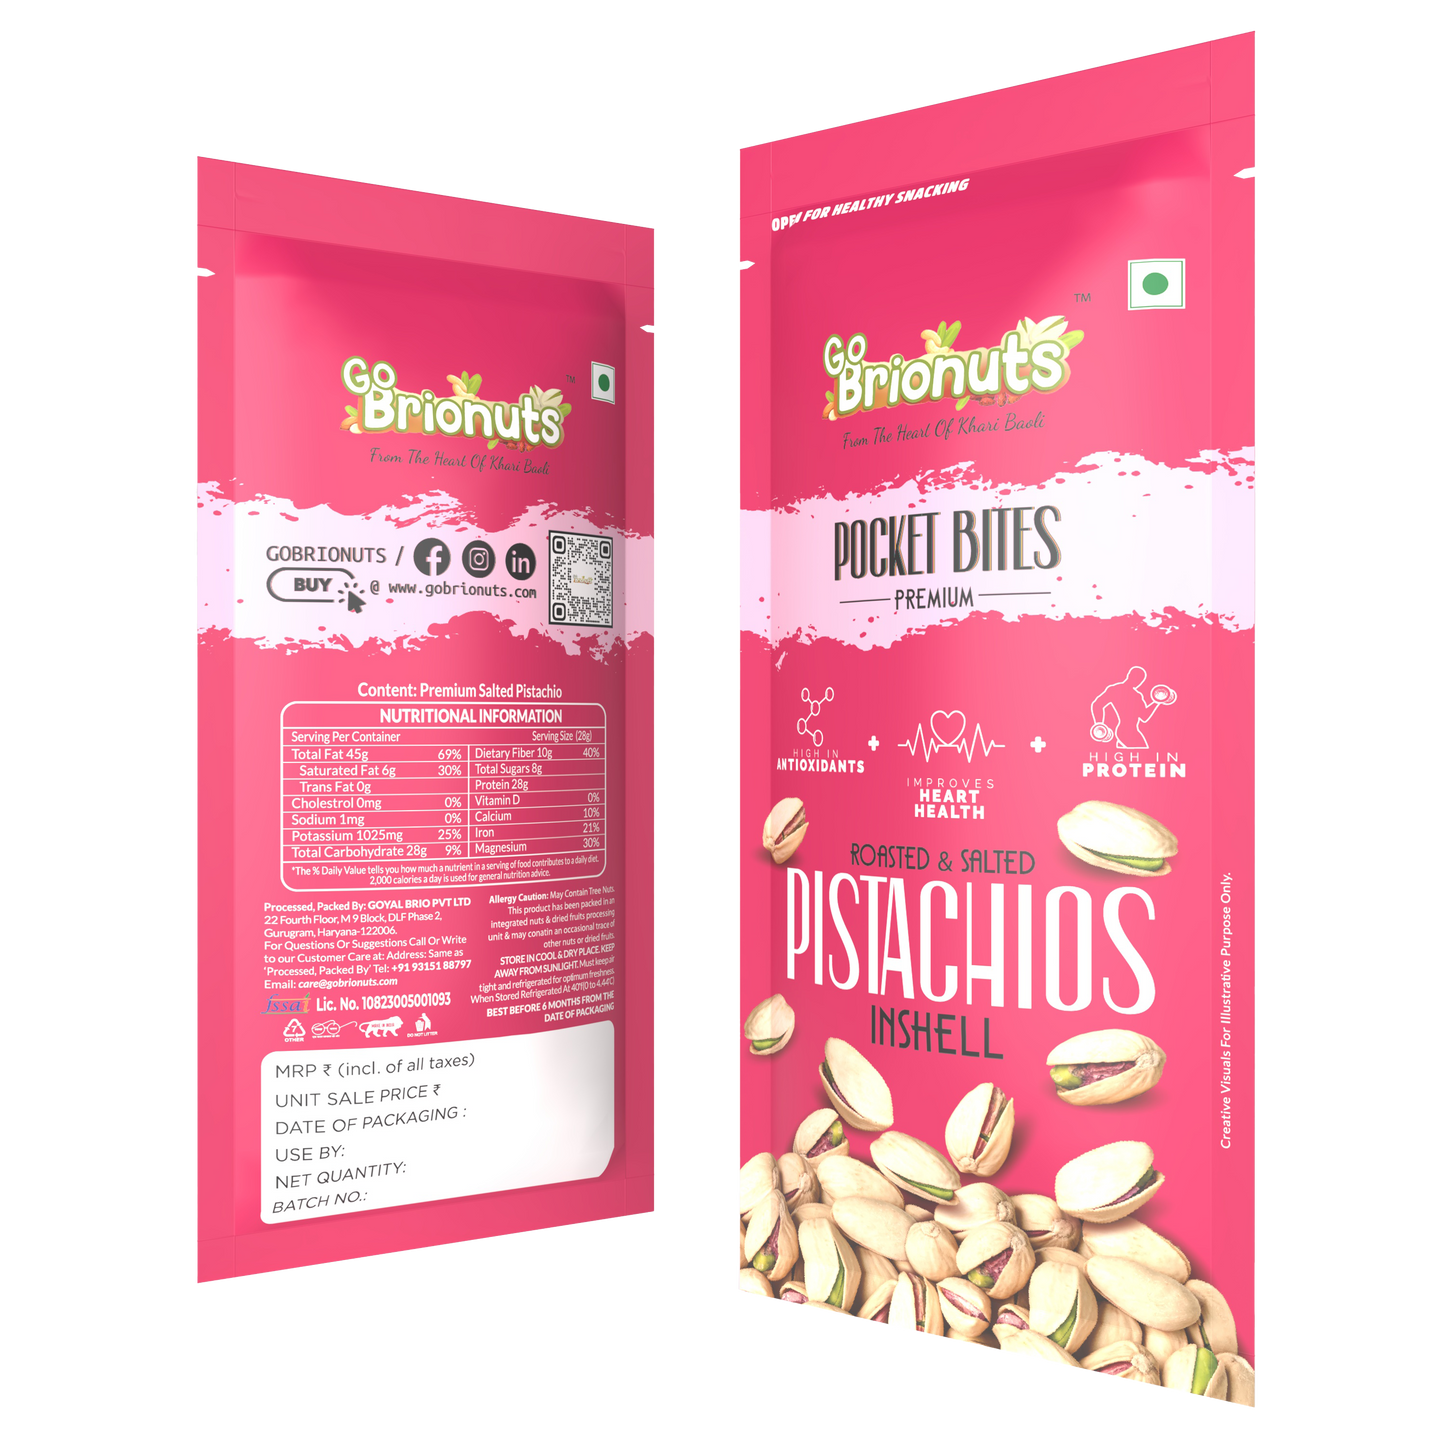 Pistachios, Roasted-Salted, Pack of 6- 35gms each (210gms)